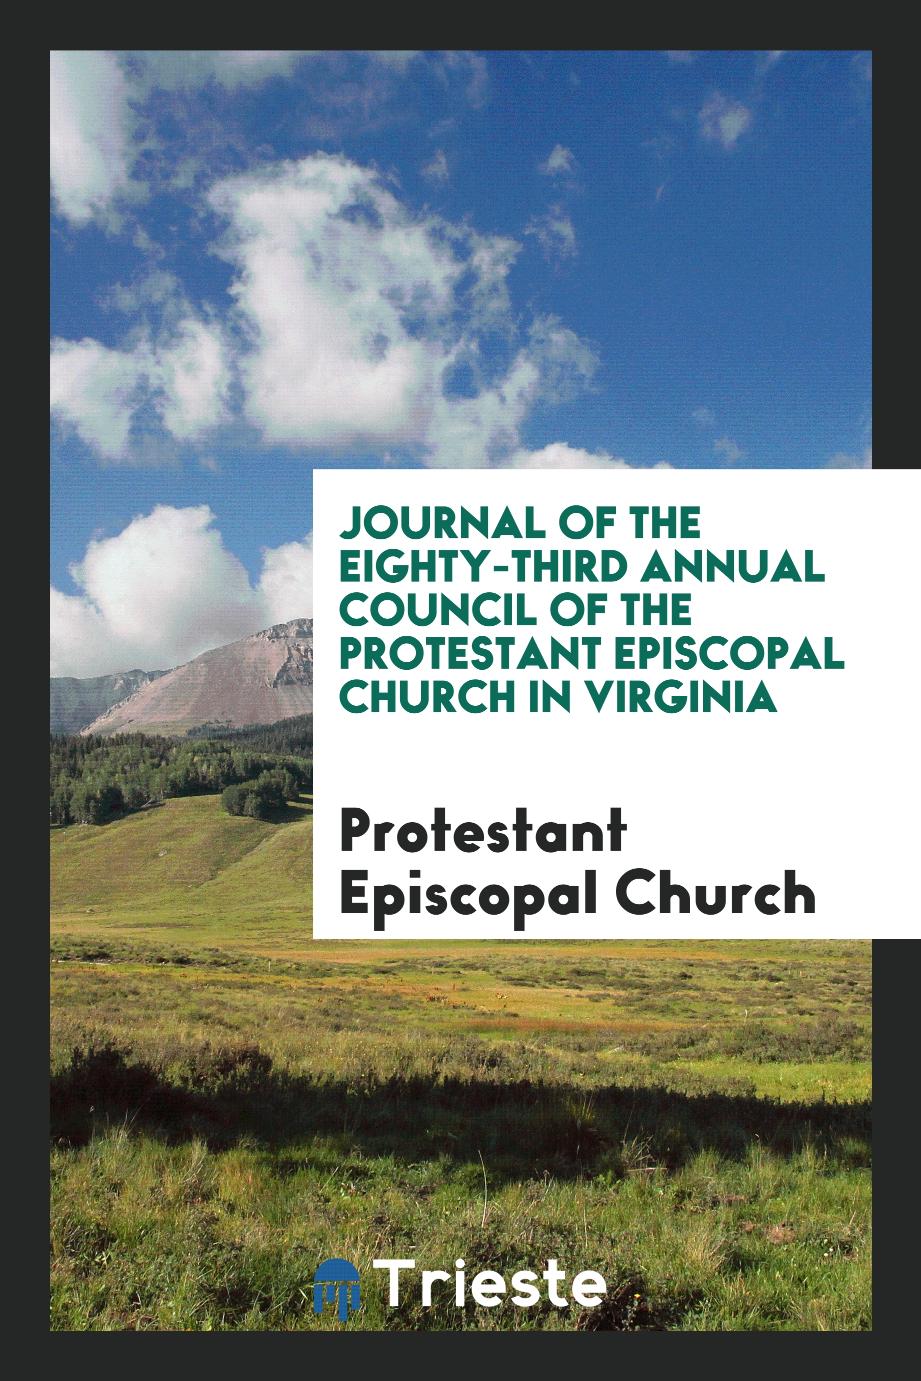 Journal of the Eighty-Third Annual Council of the Protestant Episcopal Church in Virginia